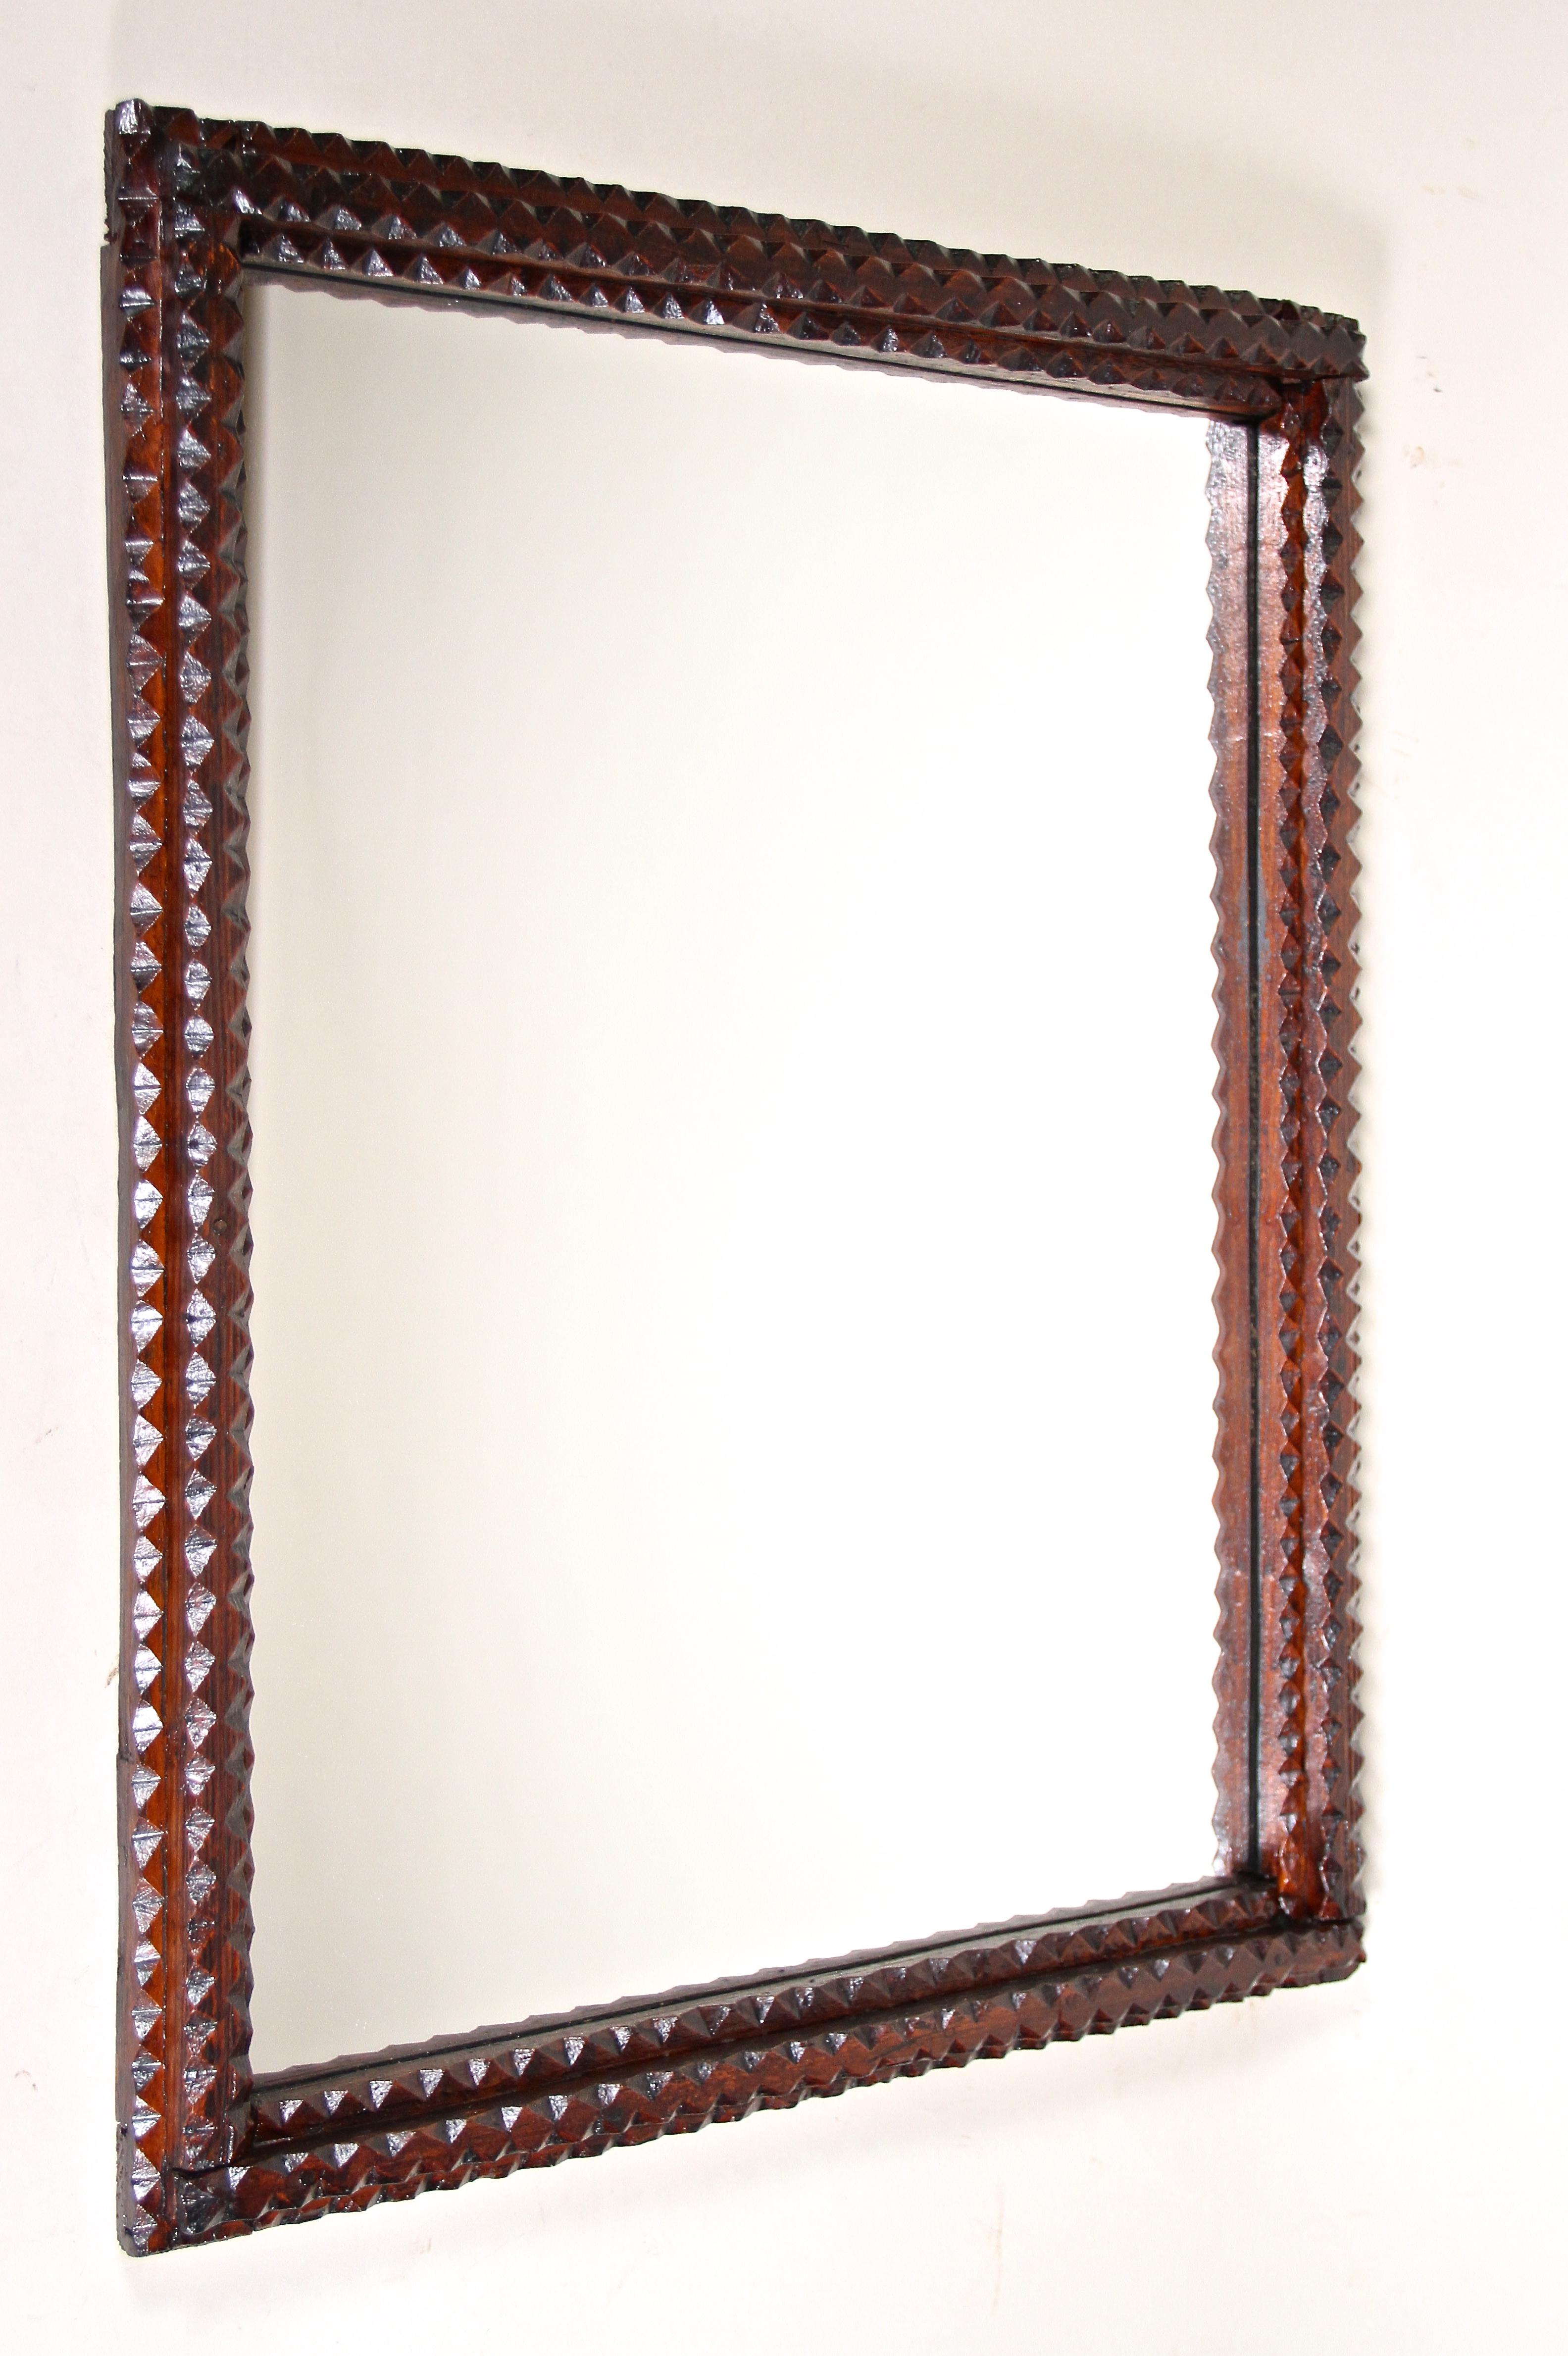 Lovely late 19th century rustic Tramp Art mirror out of Austria from around 1880. The darkbrown stained, hand carved basswood frame shows beautiful chip carvings - a technique which confers this very popular kind of mirrors this special rural touch.